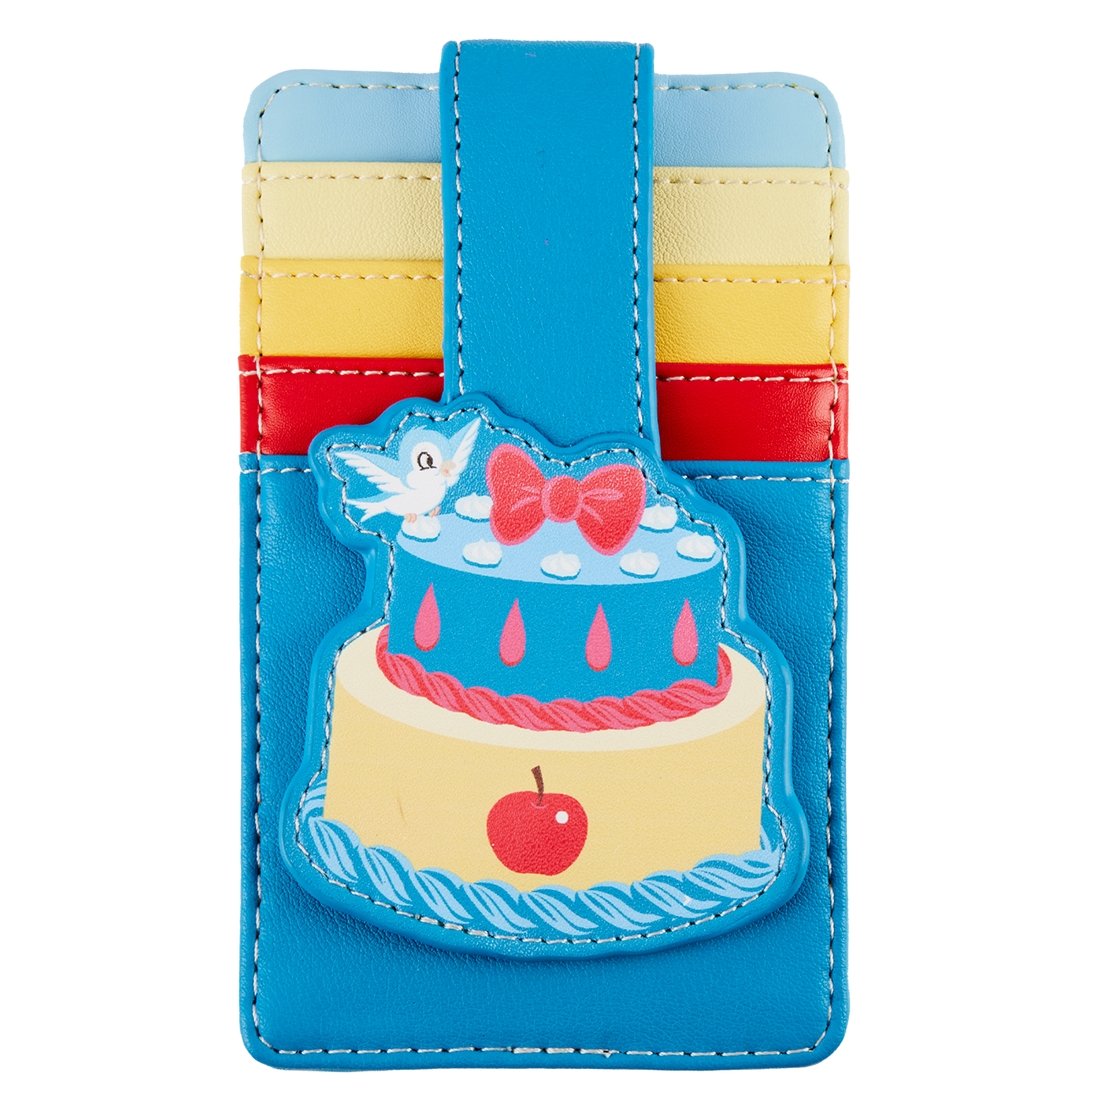 Snow White Cake Card Holder - Rockamilly-Bags & Purses-Vintage